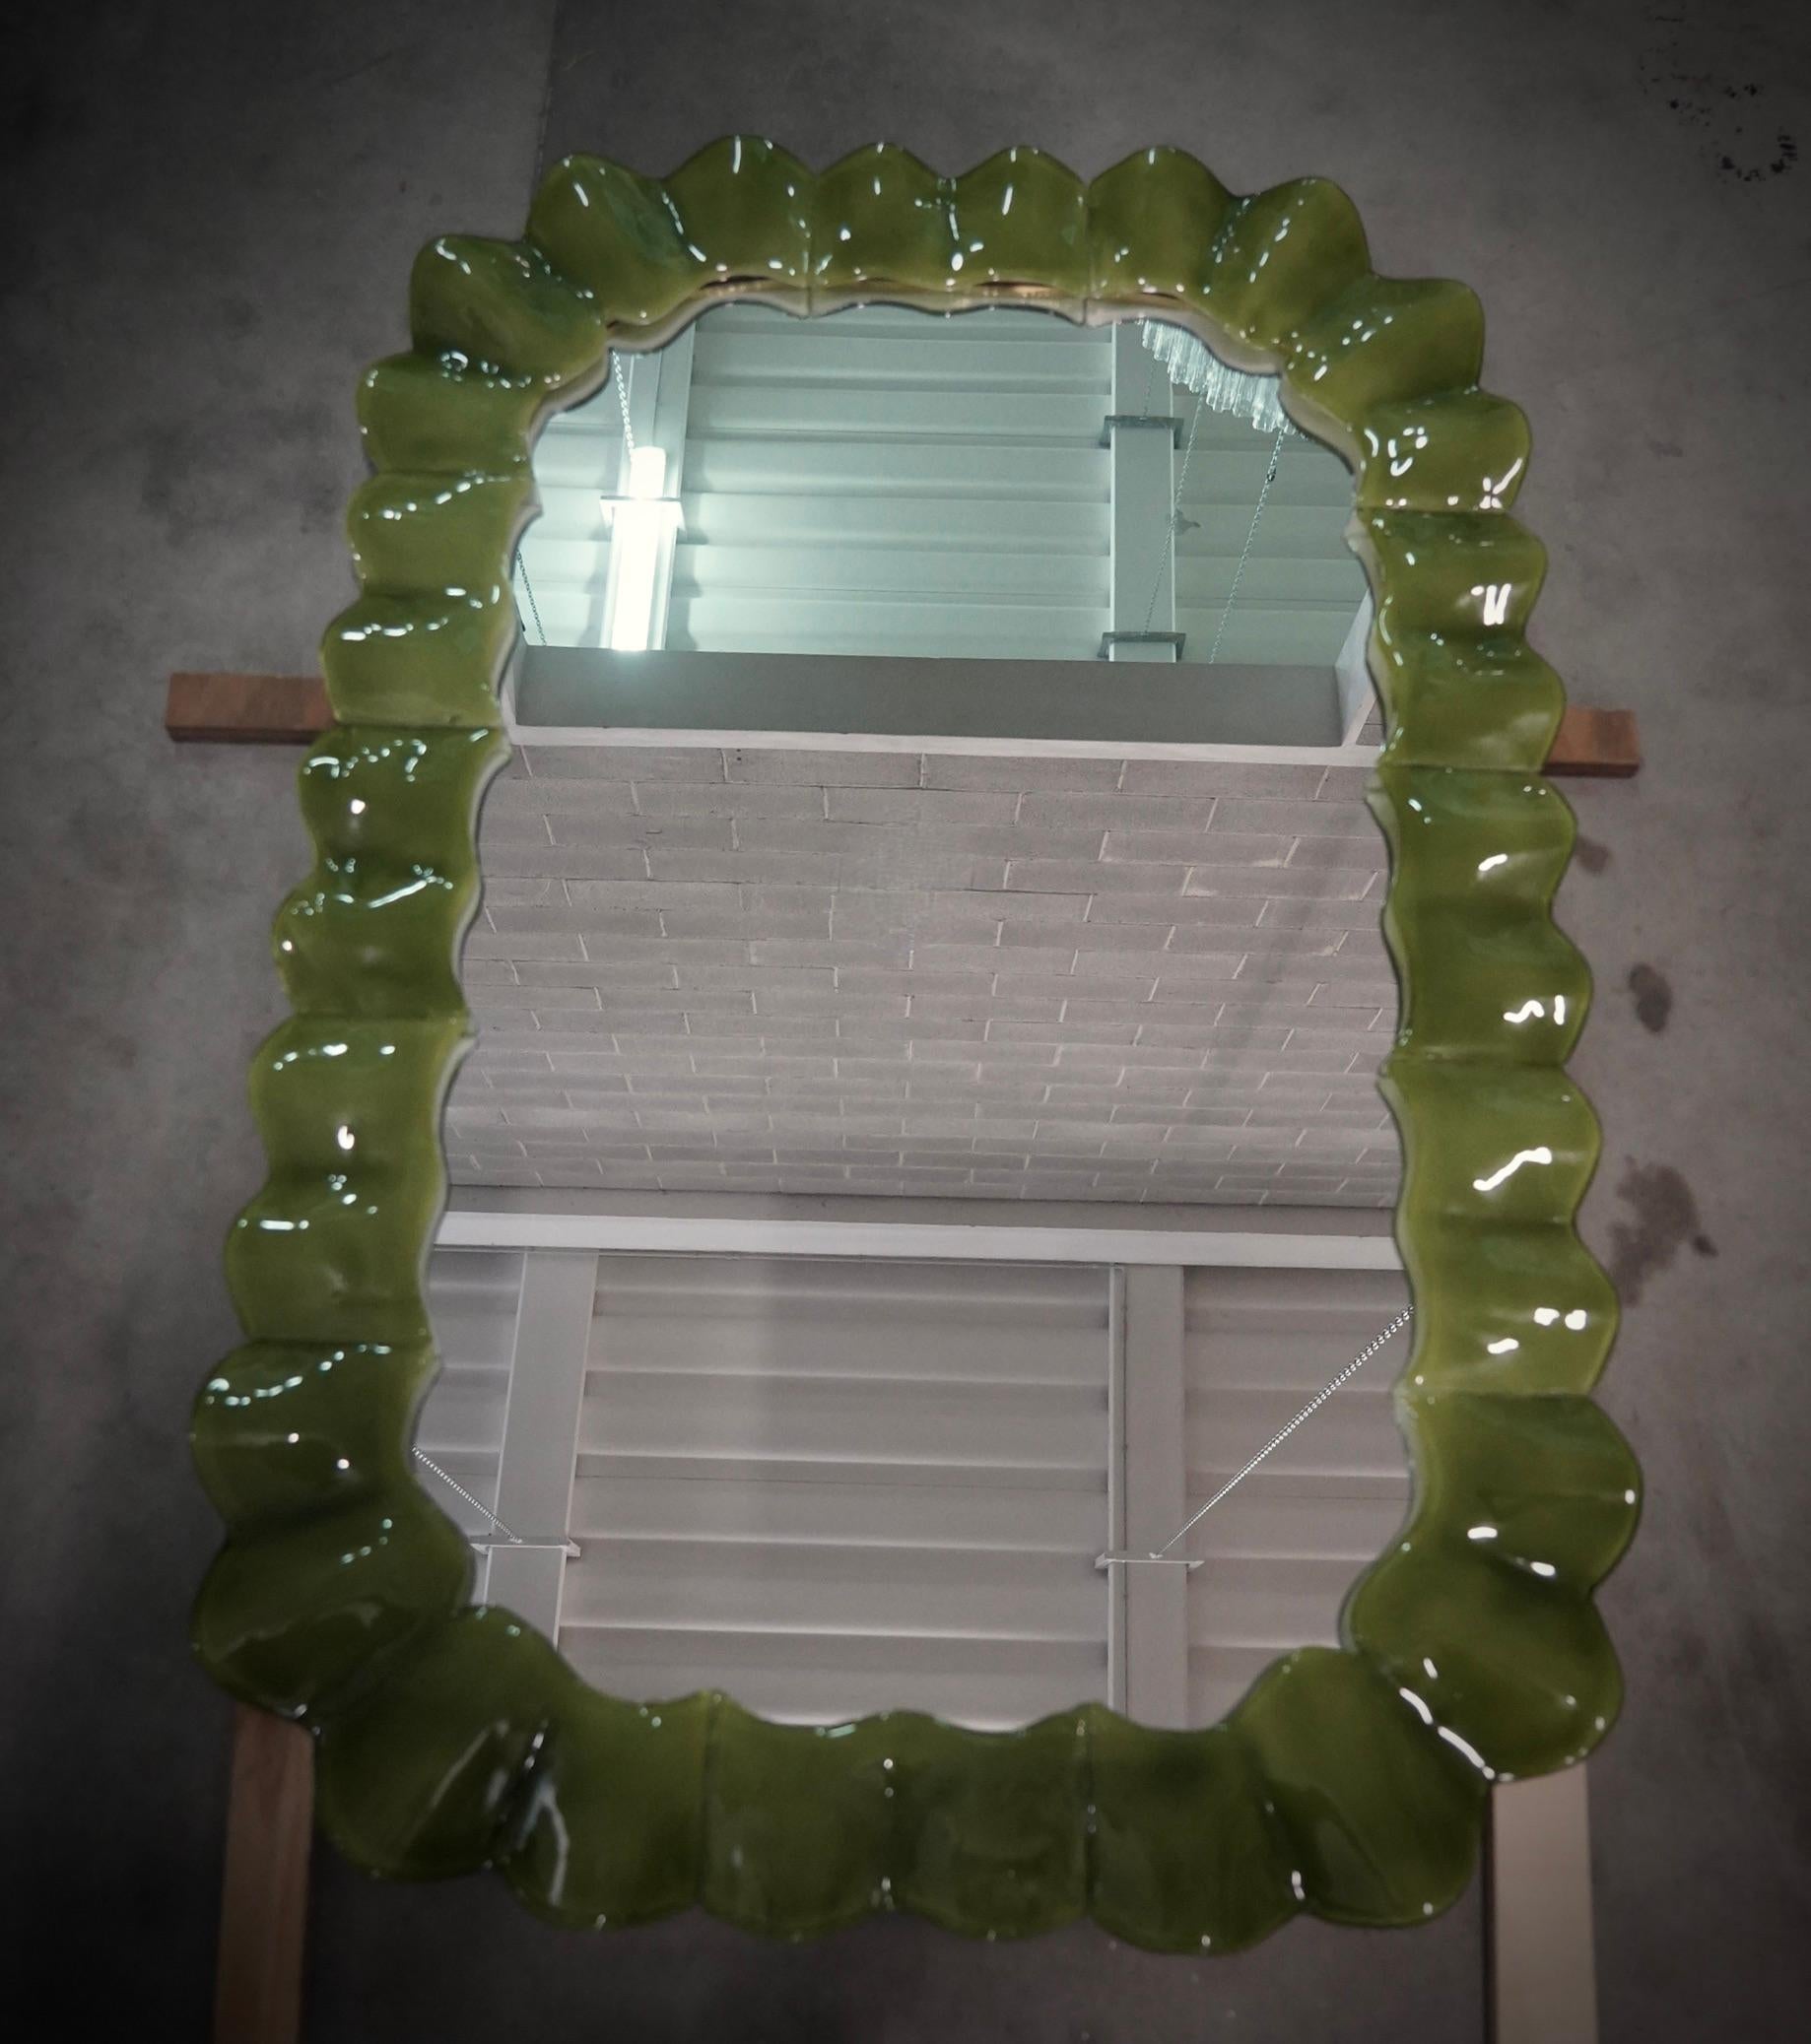 Splendid bright green Murano glass mirror. A mirror that alone will furnish your home environment. Rich but tasteful, the mirror has a truly particular design, with a very beautiful shape of these glass sections.

The mirror has a wooden rear